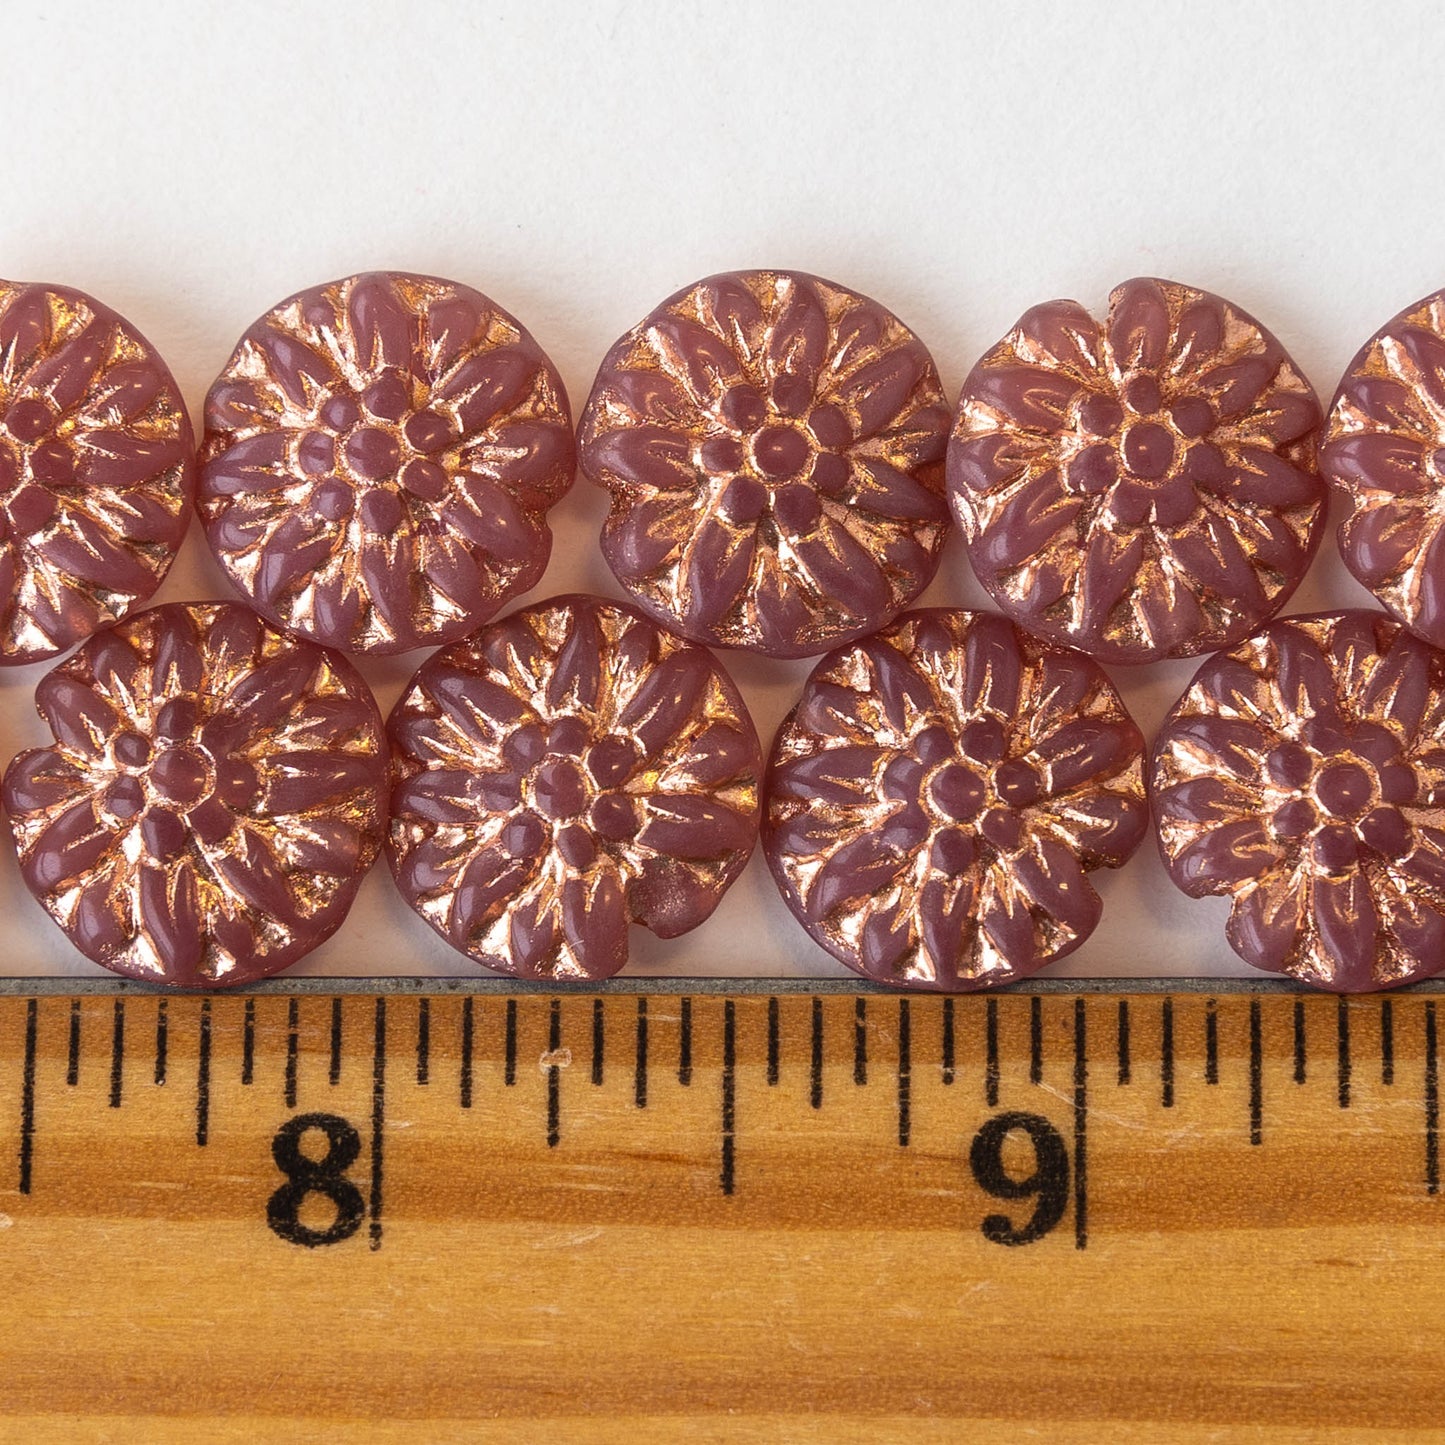 14mm Dahlia Flower Beads - Dusty Rose with Copper Wash - 10 Beads